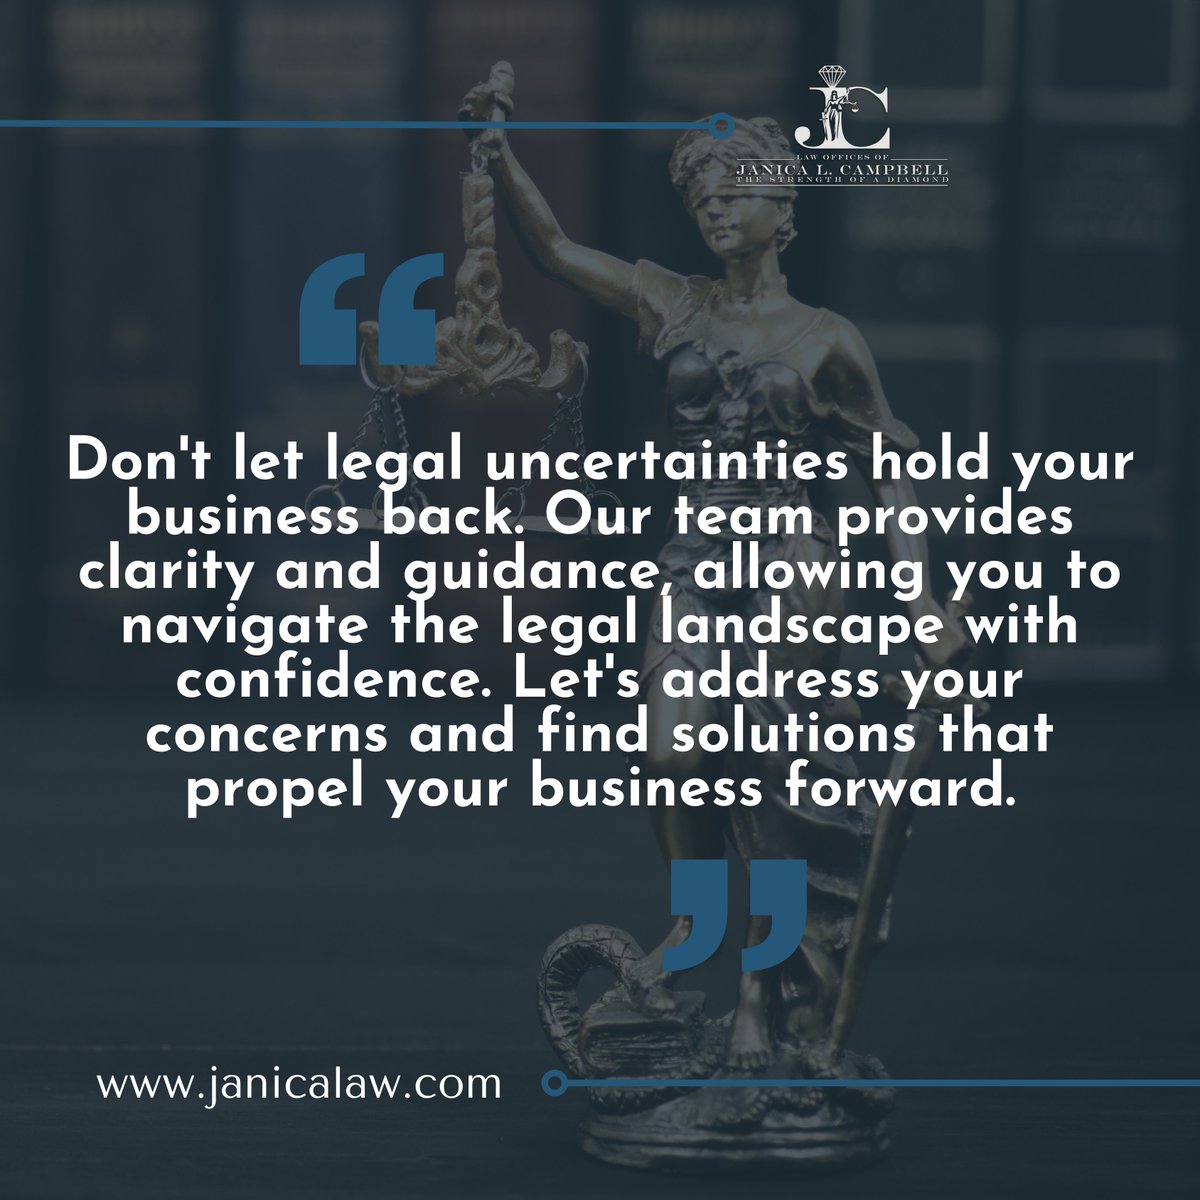 🚀 Don't let legal uncertainties hold your business back. Our team provides clarity and guidance, allowing you to navigate the legal landscape with confidence.

#LegalClarity #BusinessGuidance #LegalSolutions #BusinessLaw #LegalAdvice #NavigateWithConfidence #EntrepreneurialLaw